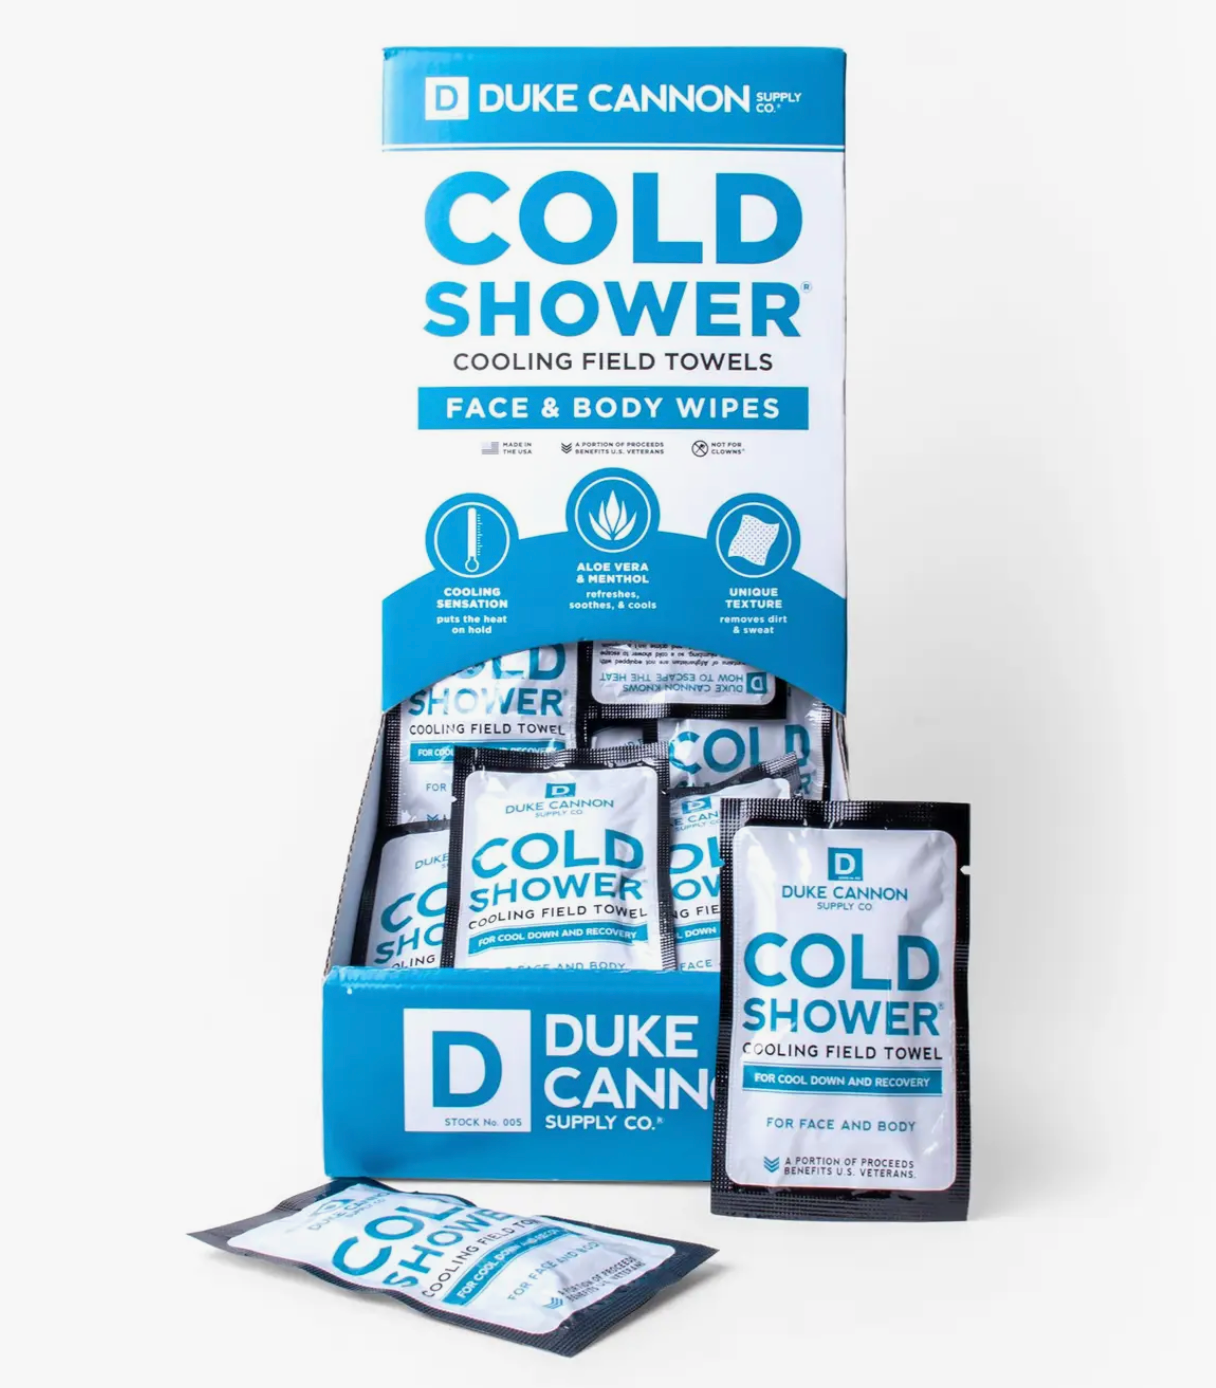 The Cold Shower Tower